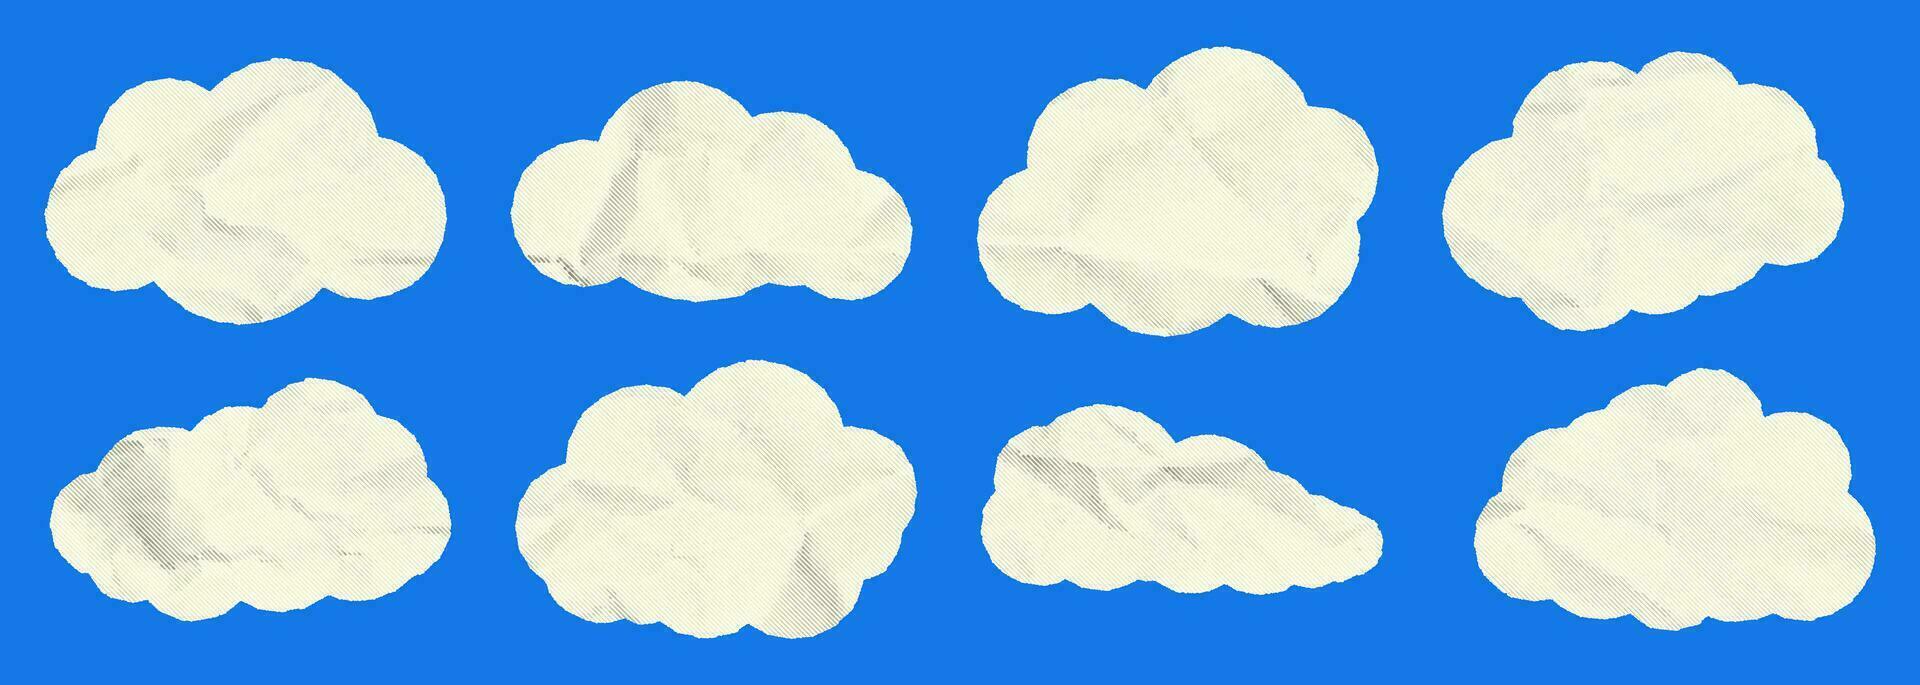 Set of simple clouds with paper texture for retro collages. Collection of elements with halftone effect. vector